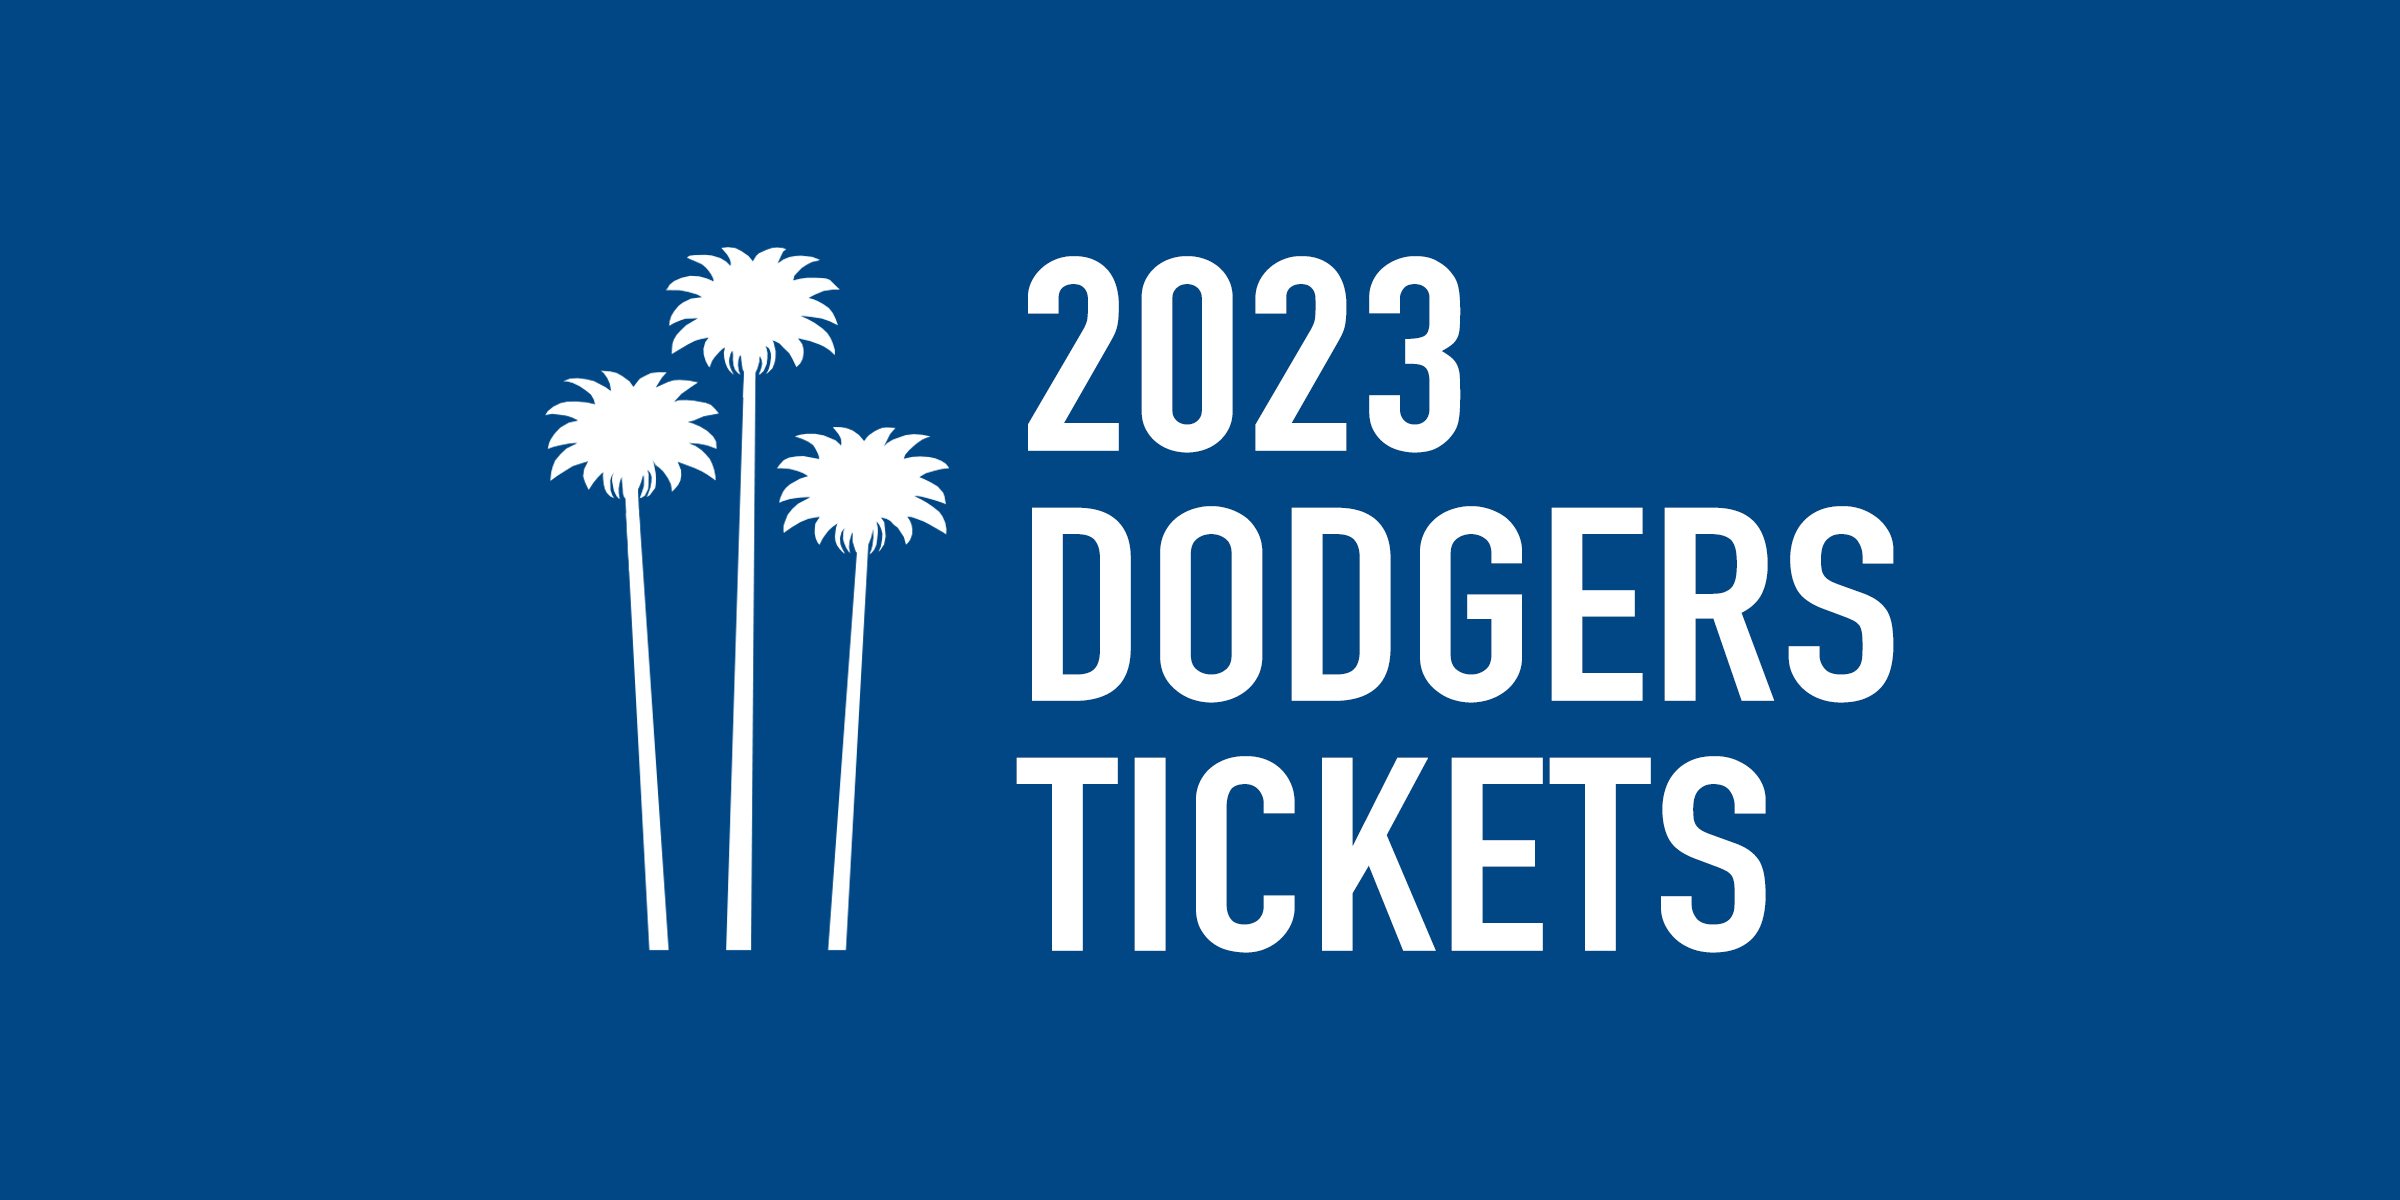 Check out the upcoming ticket packs - Los Angeles Dodgers